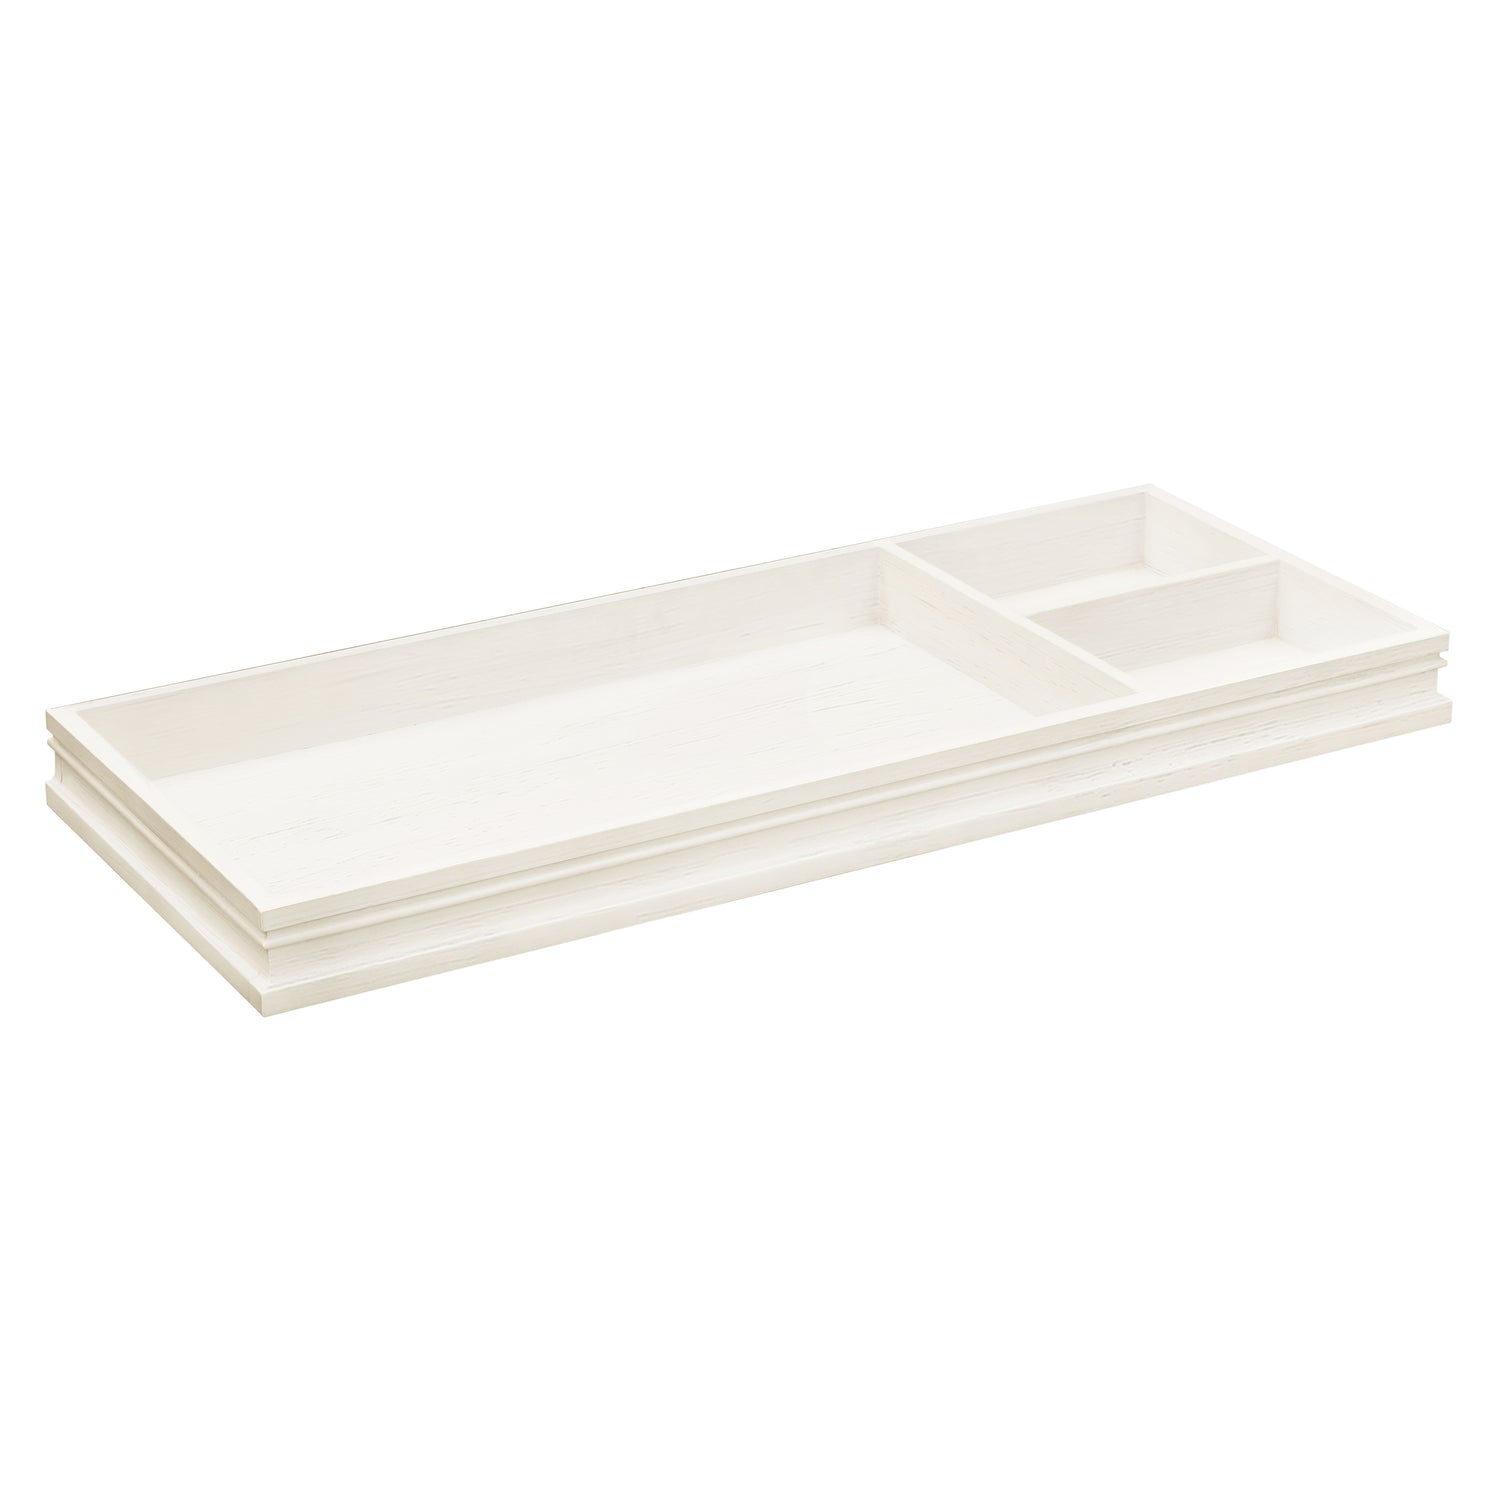 M20419CN,Rhodes Removable Changing Tray in Cotton